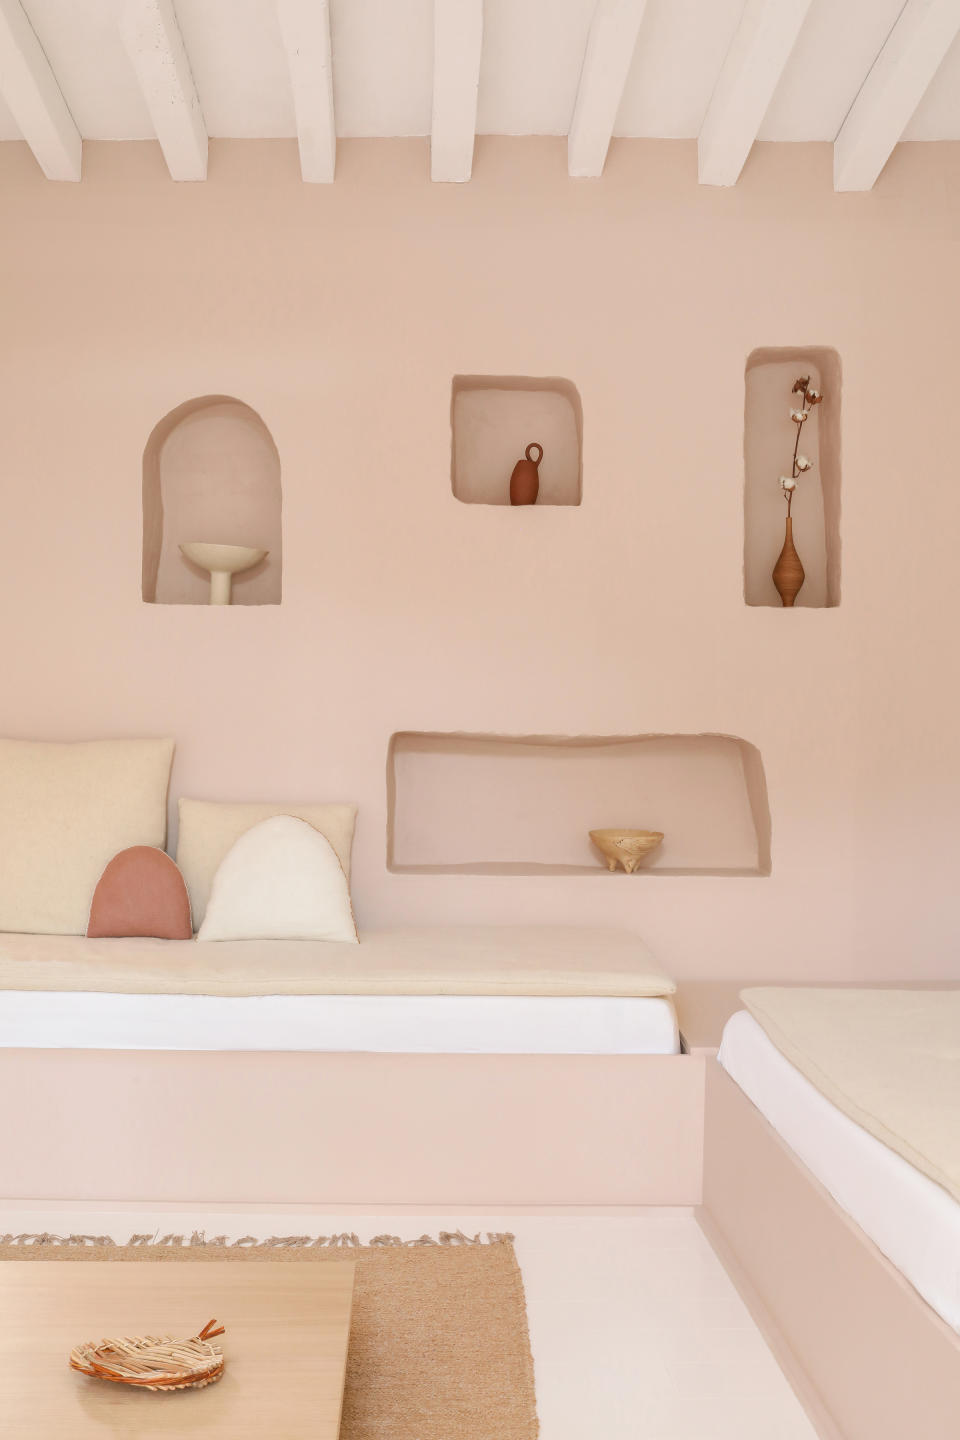 A pink living room with small niches on the walls